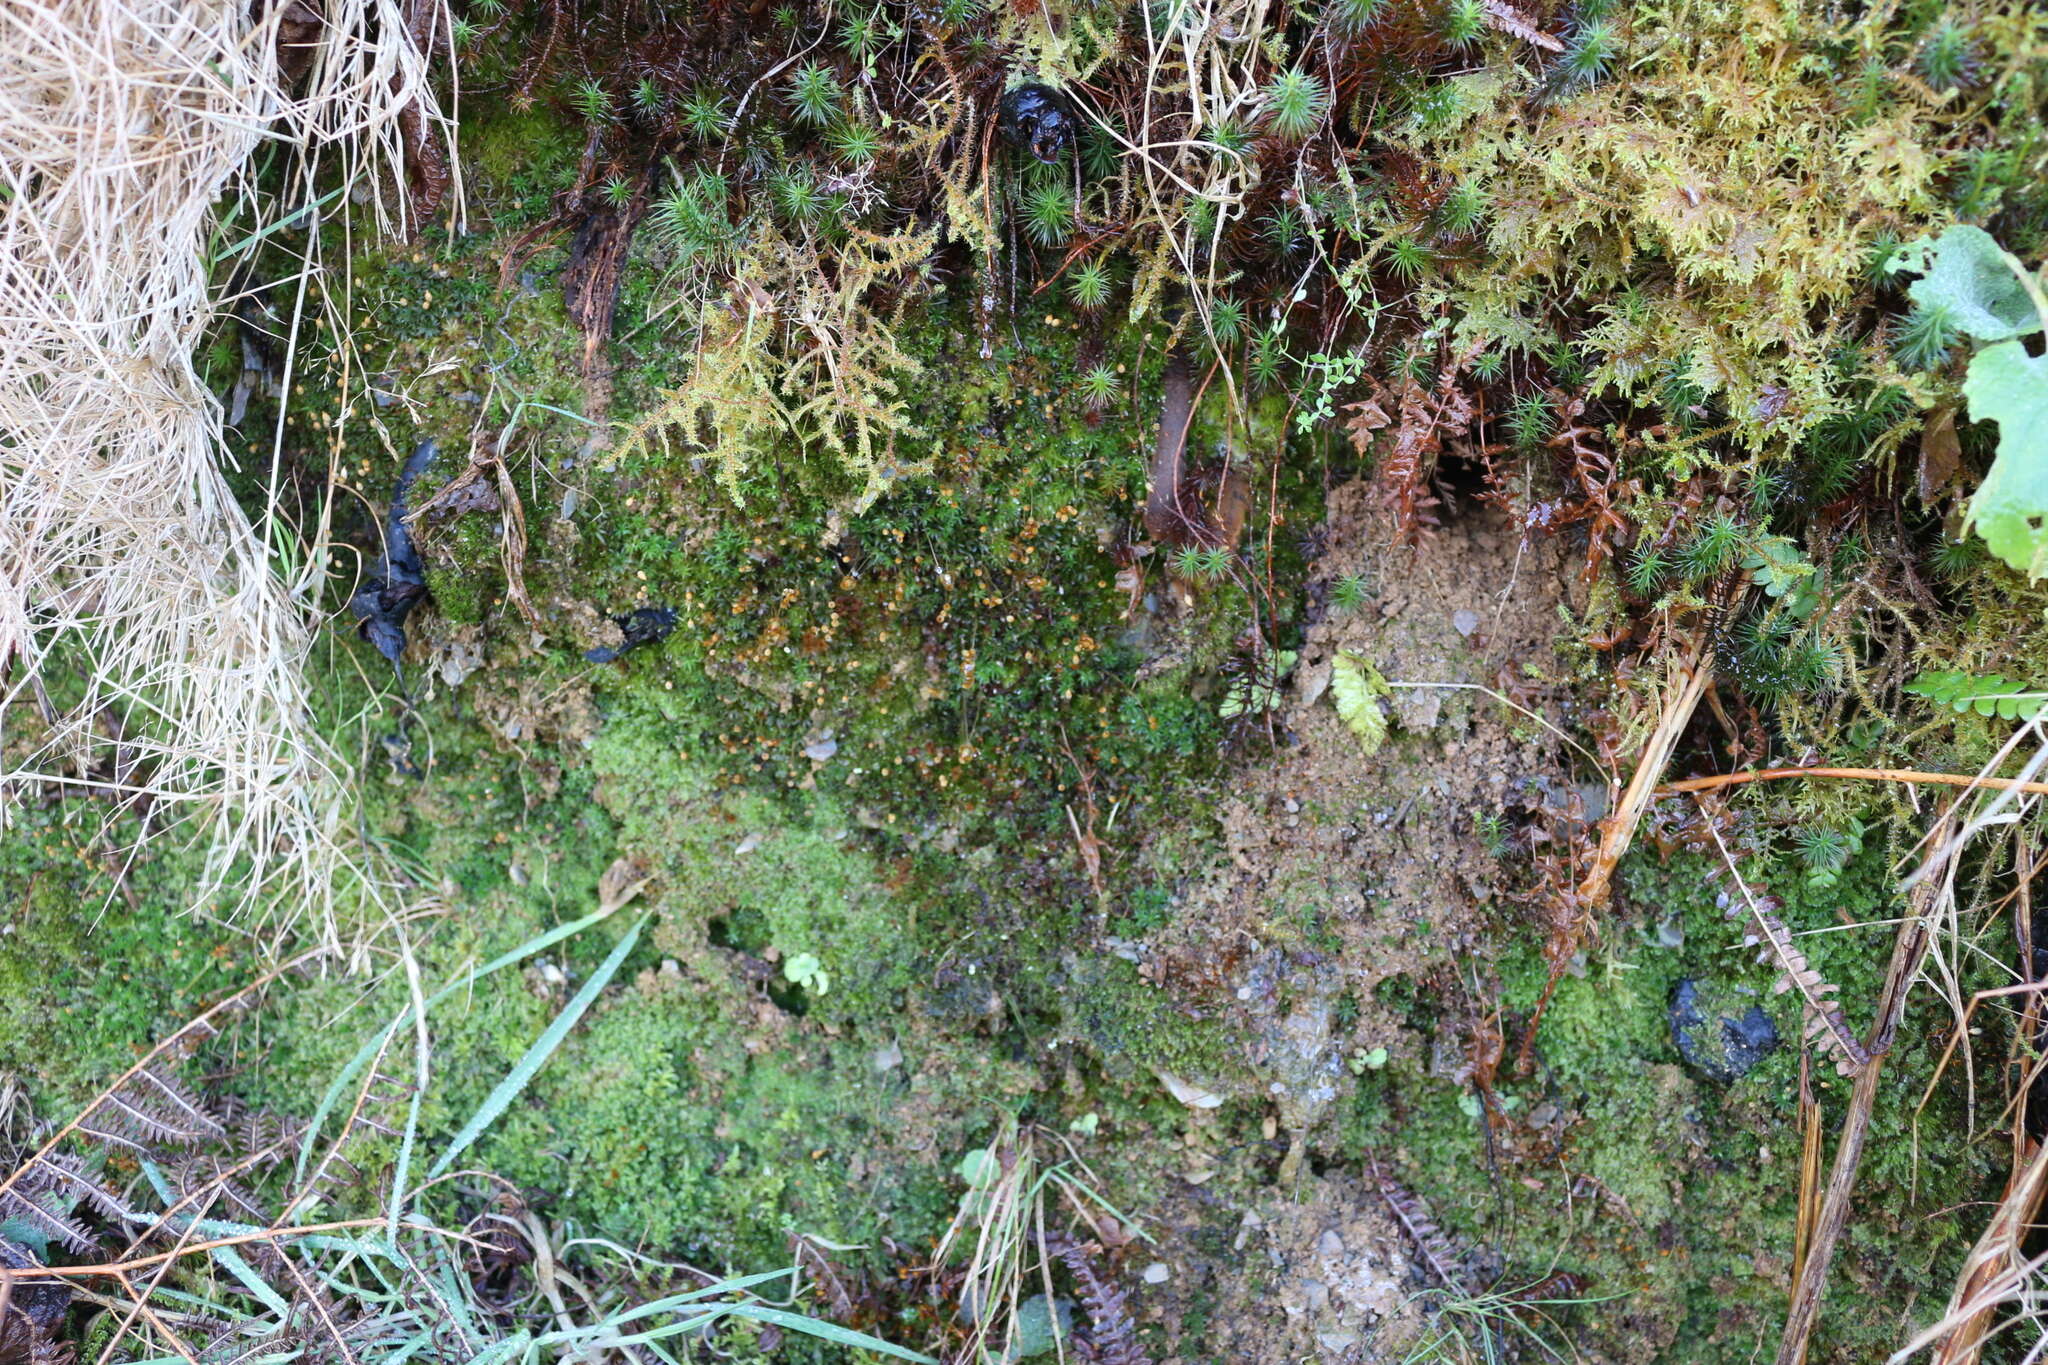 Image of ditrichum moss